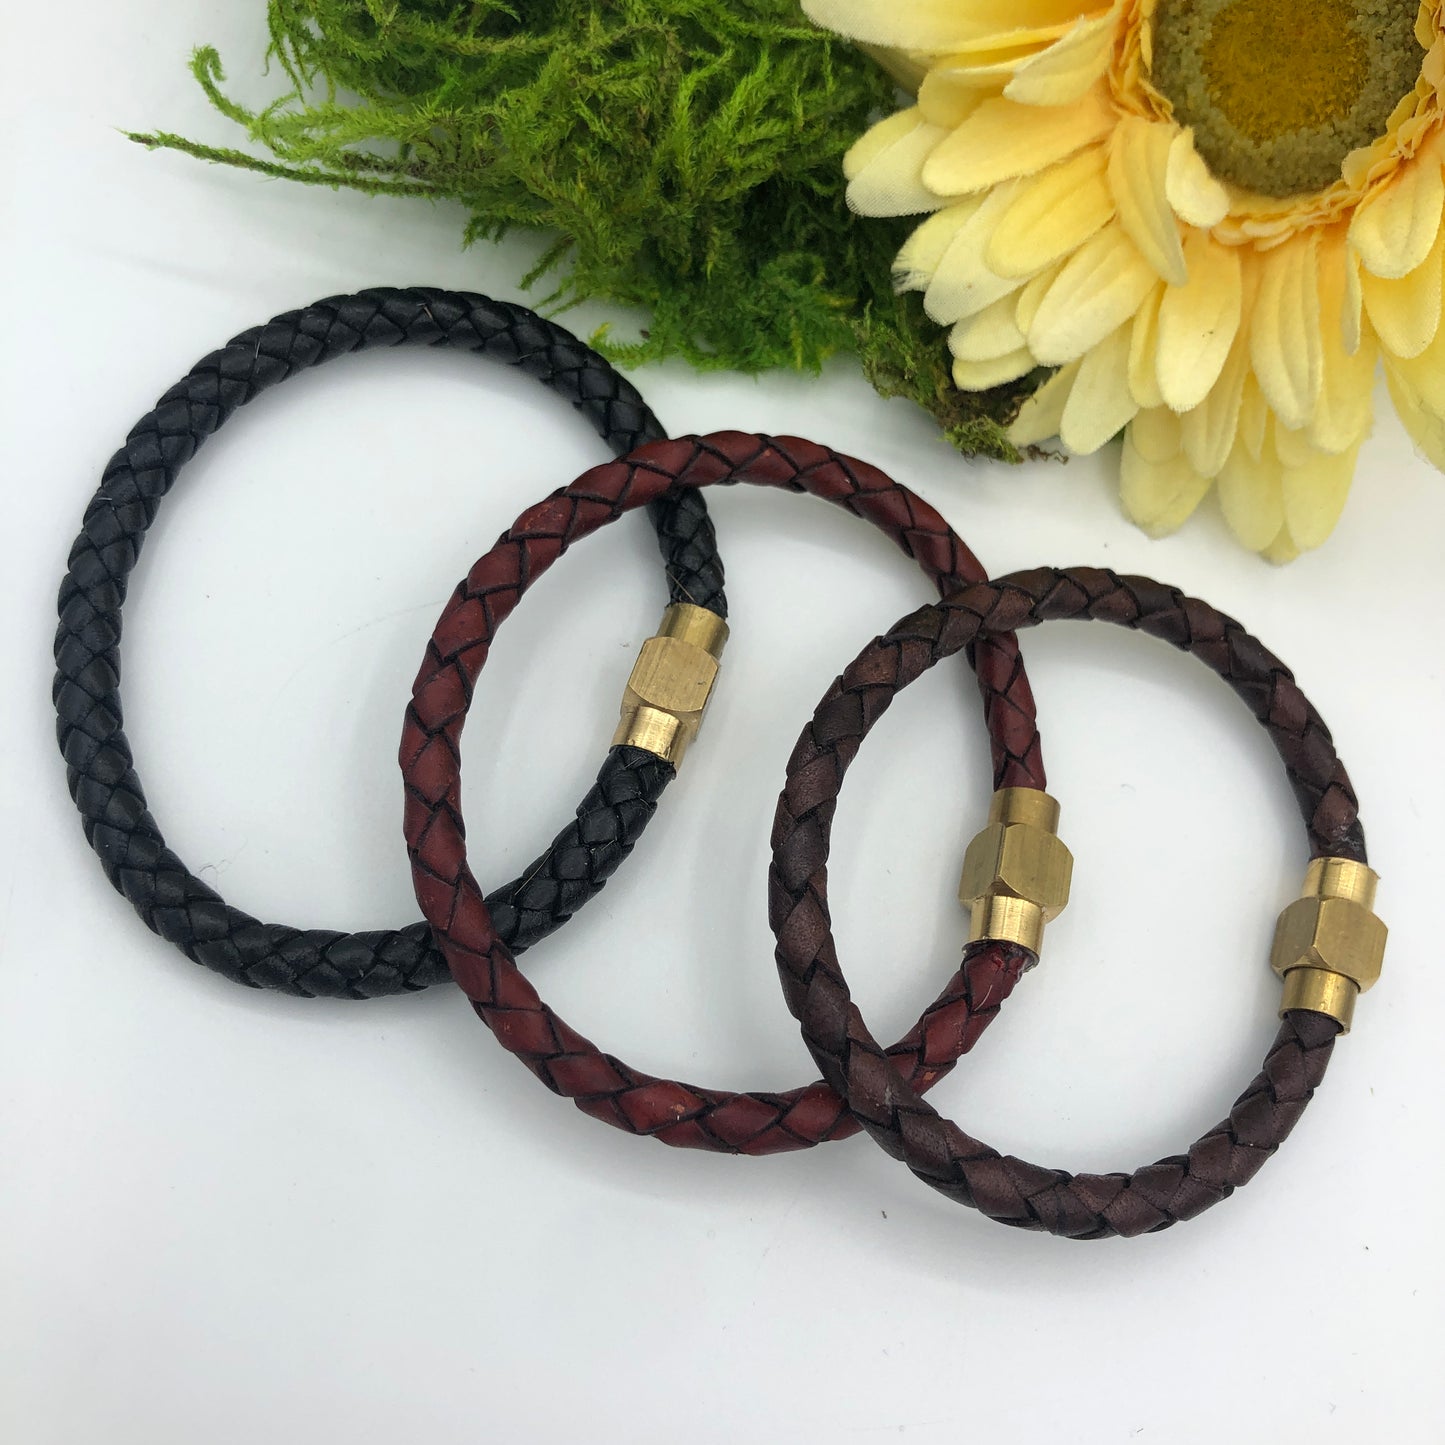 HANDCRAFTED 6MM LEATHER BOLO CORD BRACELET WITH MAGNET CLOSURE